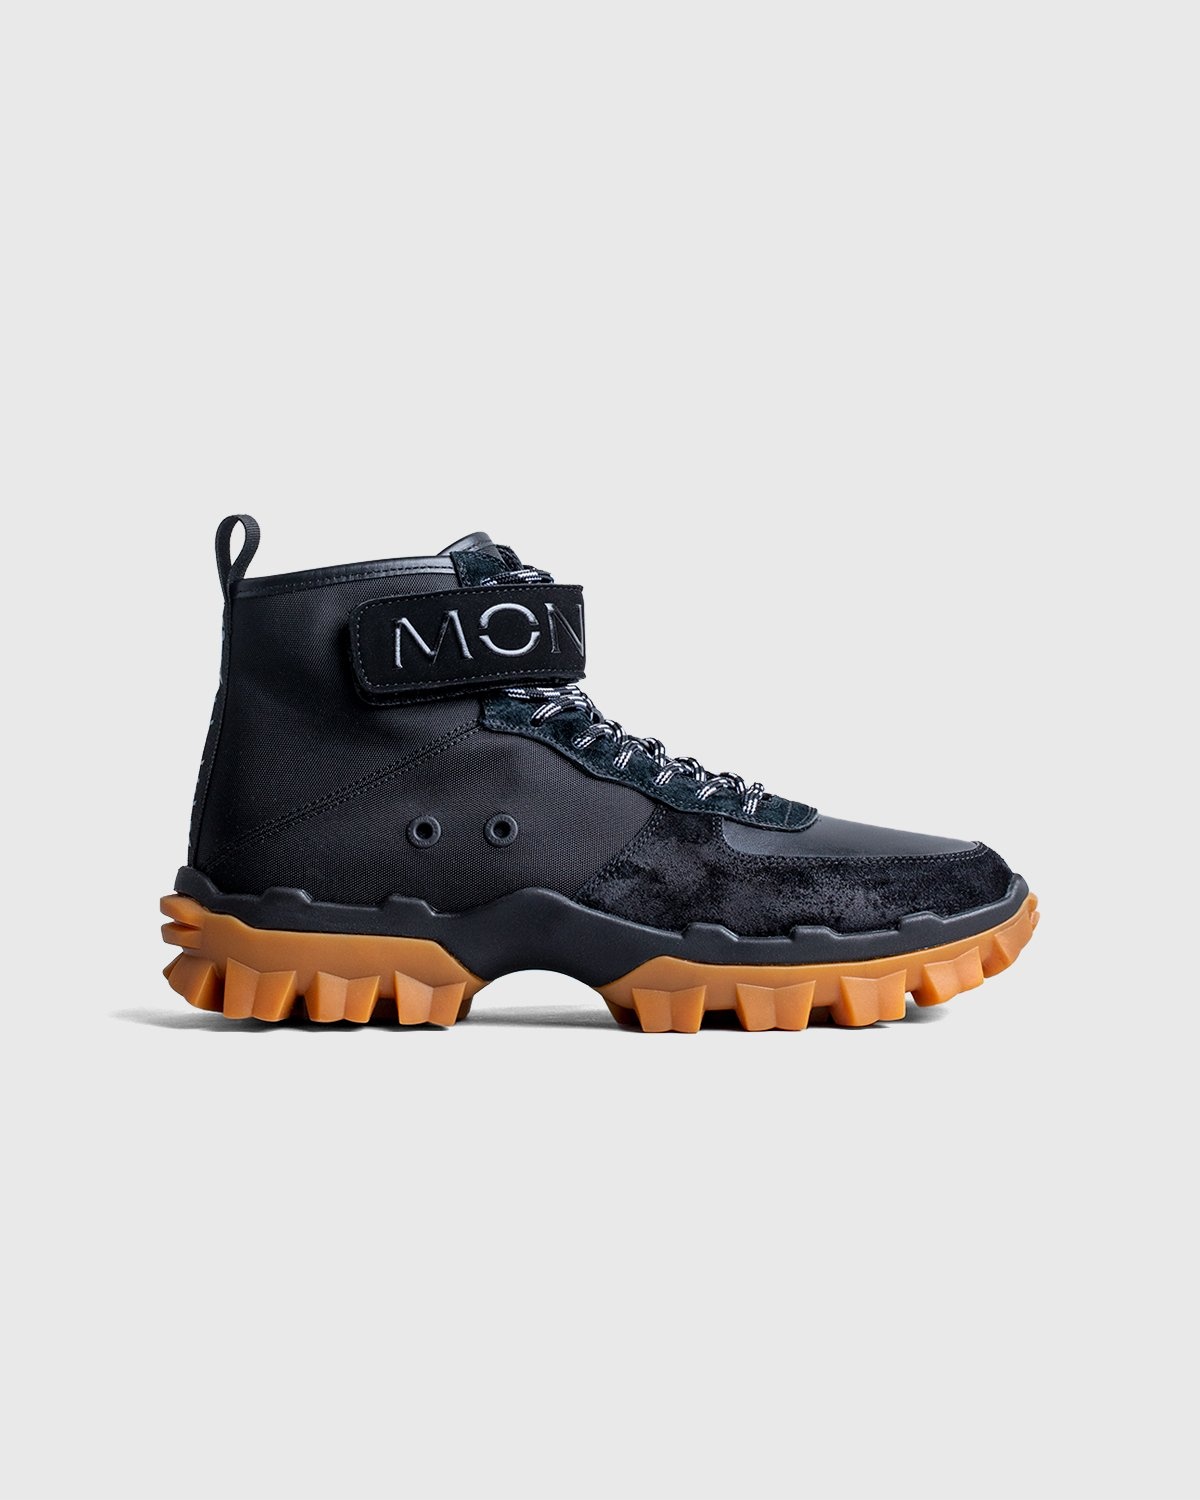 Moncler Genius – Recycled Hugo Shoes - Shoes - Black - Image 1